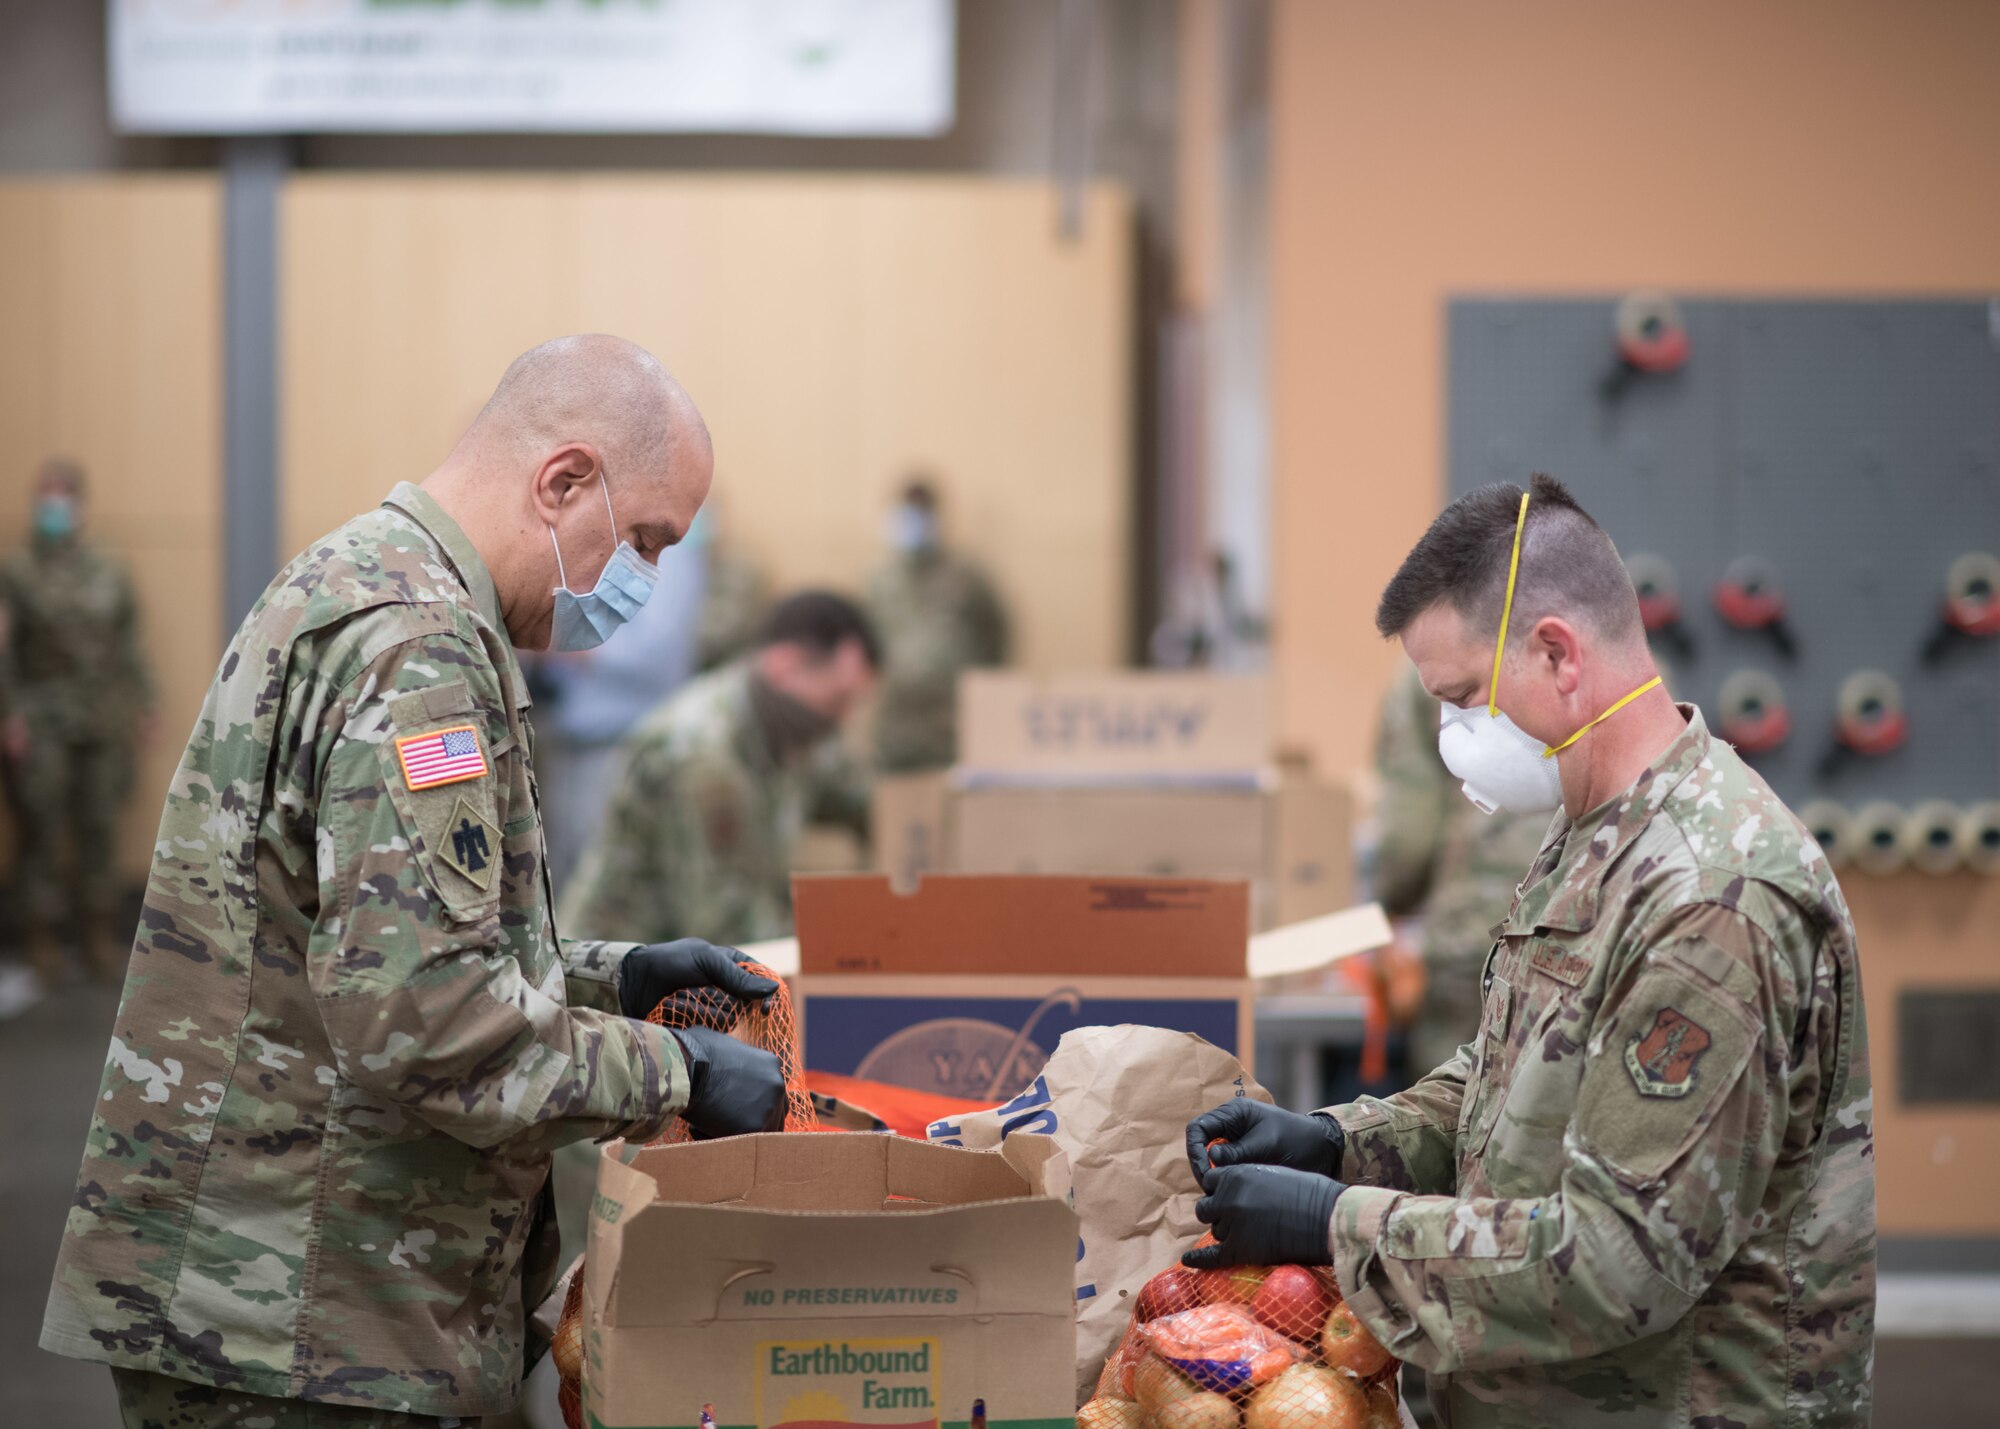 Oklahoma Army National Guard Maj. Gen. Michael Thompson, left, the adjutant general for Oklahoma, packs produce bags with Oklahoma Air National Guard Tech. Sgt. Luke Goodnight, right, a member of the 138th Fighter Wing, at the Community Food Bank of Eastern Oklahoma in Tulsa, Oklahoma, April 29, 2020. Due to COVID-19, Guardsmen have been working daily to replace the vital volunteer force that usually pack the food until it is safe to have them return. At the direction of Governor Kevin Stitt, Oklahoma Guardsmen were activated to serve in various roles in support of the State's COVID-19 response including support to food banks. (U.S. Air National Guard photo by Tech. Sgt. Rebecca Imwalle)